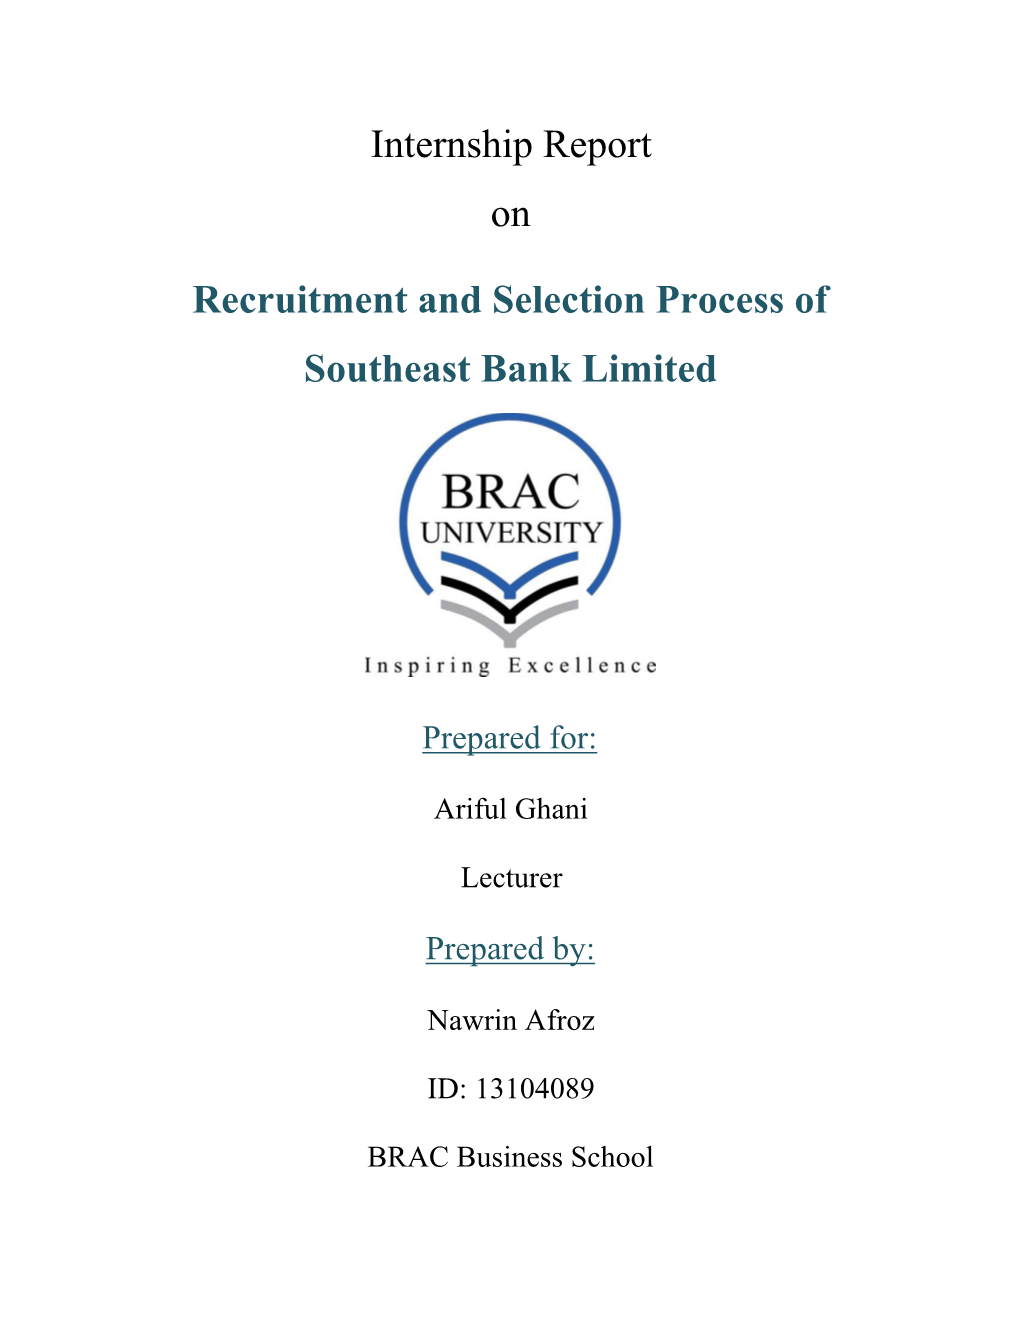 Recruitment and Selection Process of Southeast Bank Limited”, As a Requirement of the Regular BBA Program of BRAC Business School